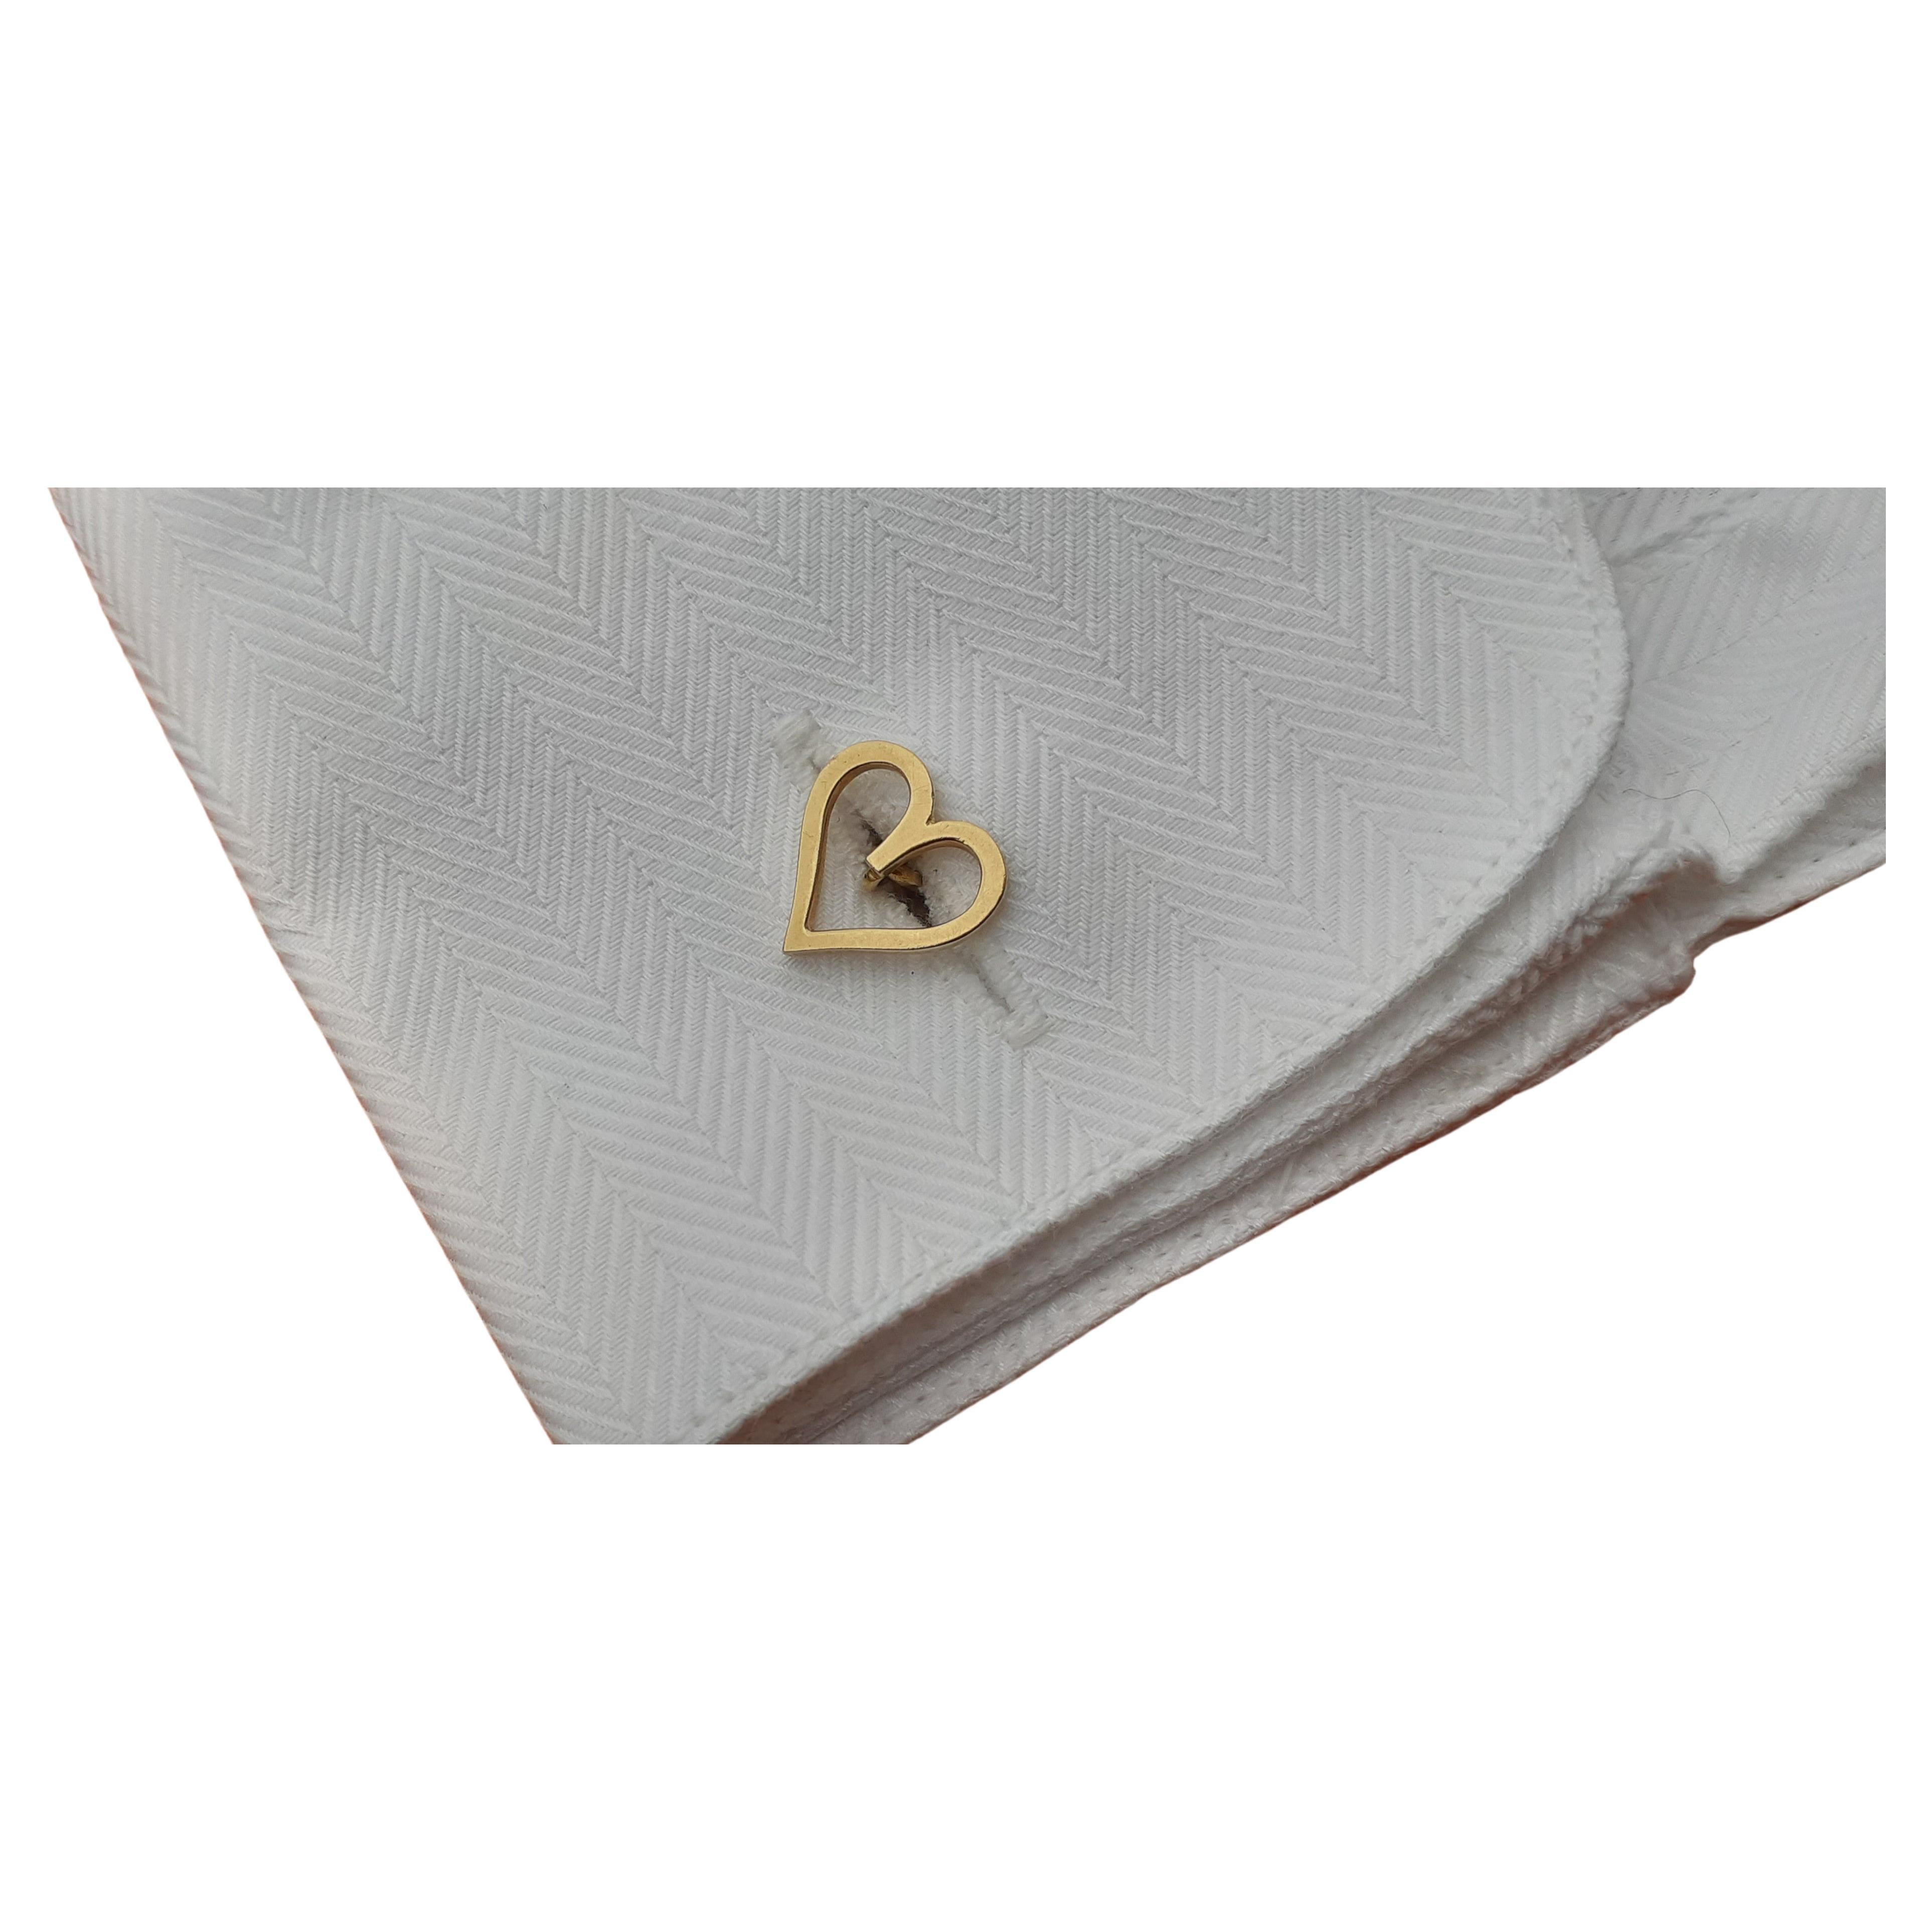 Exceptional Hermès Heart Shaped Cufflinks in Yellow Gold For Sale